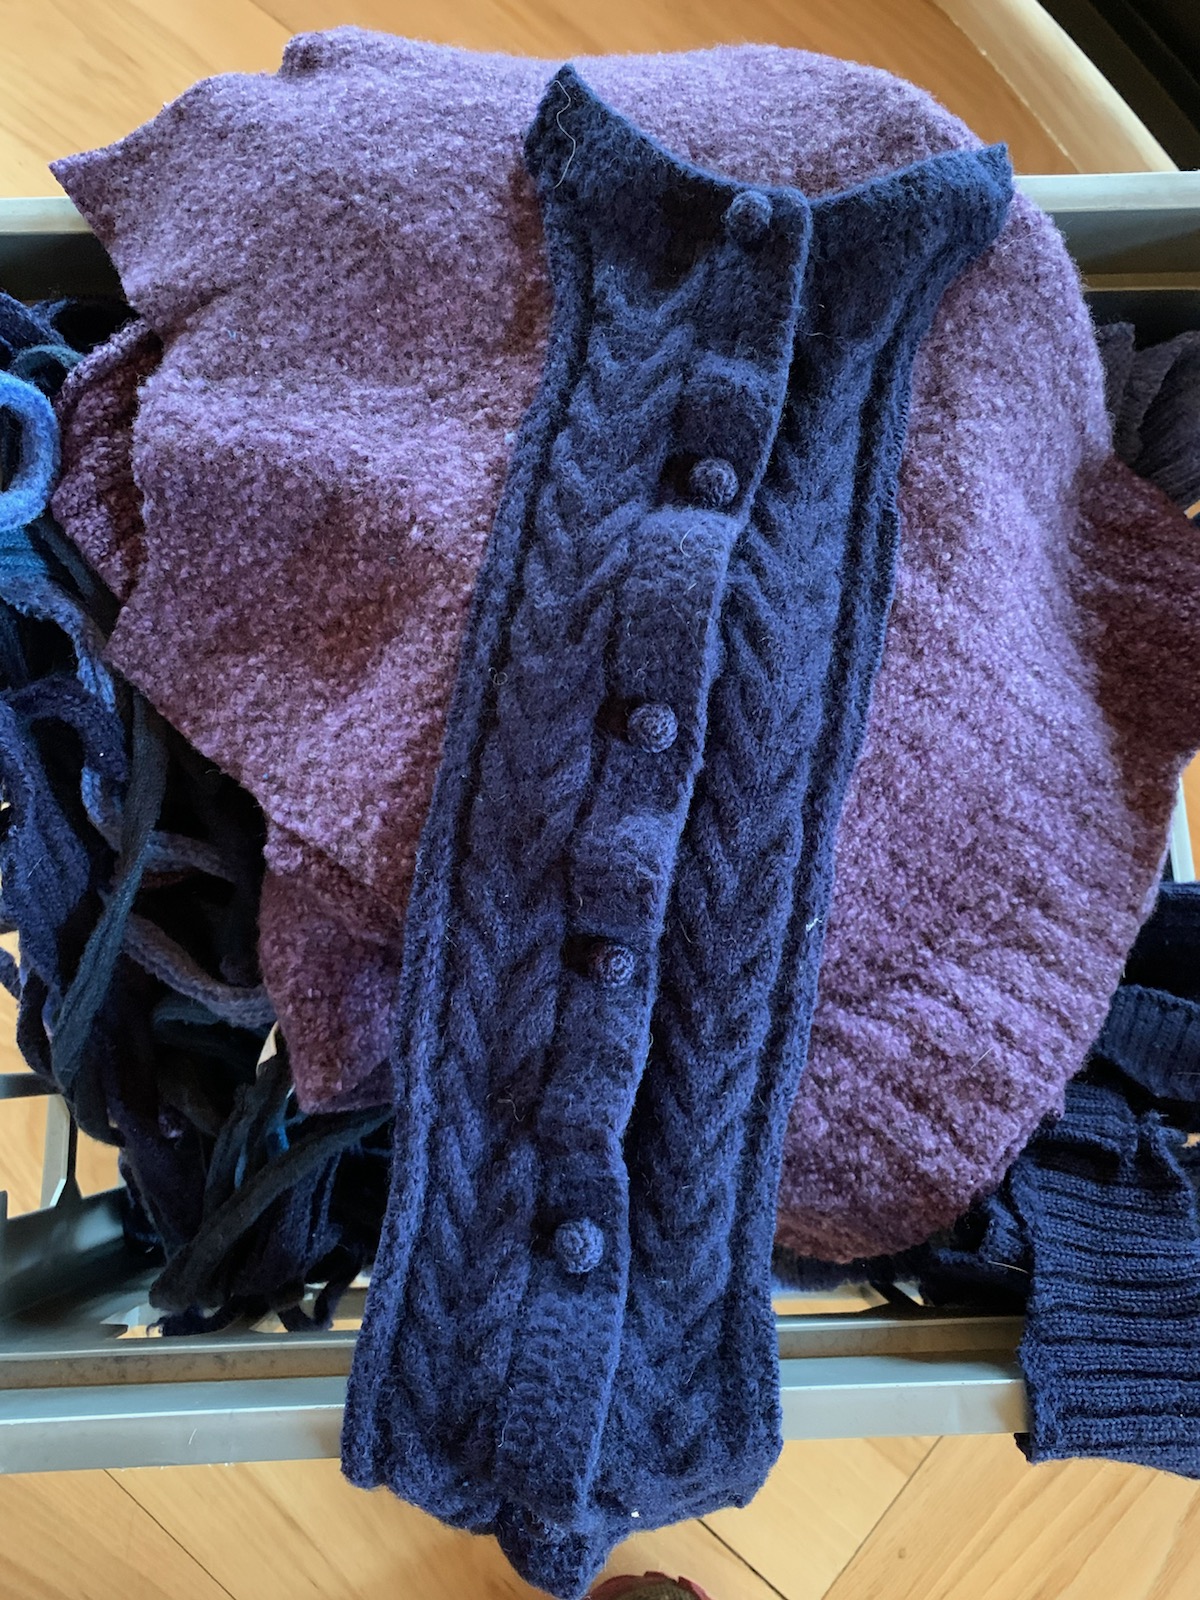 cut up, felted purple and blue sweaters